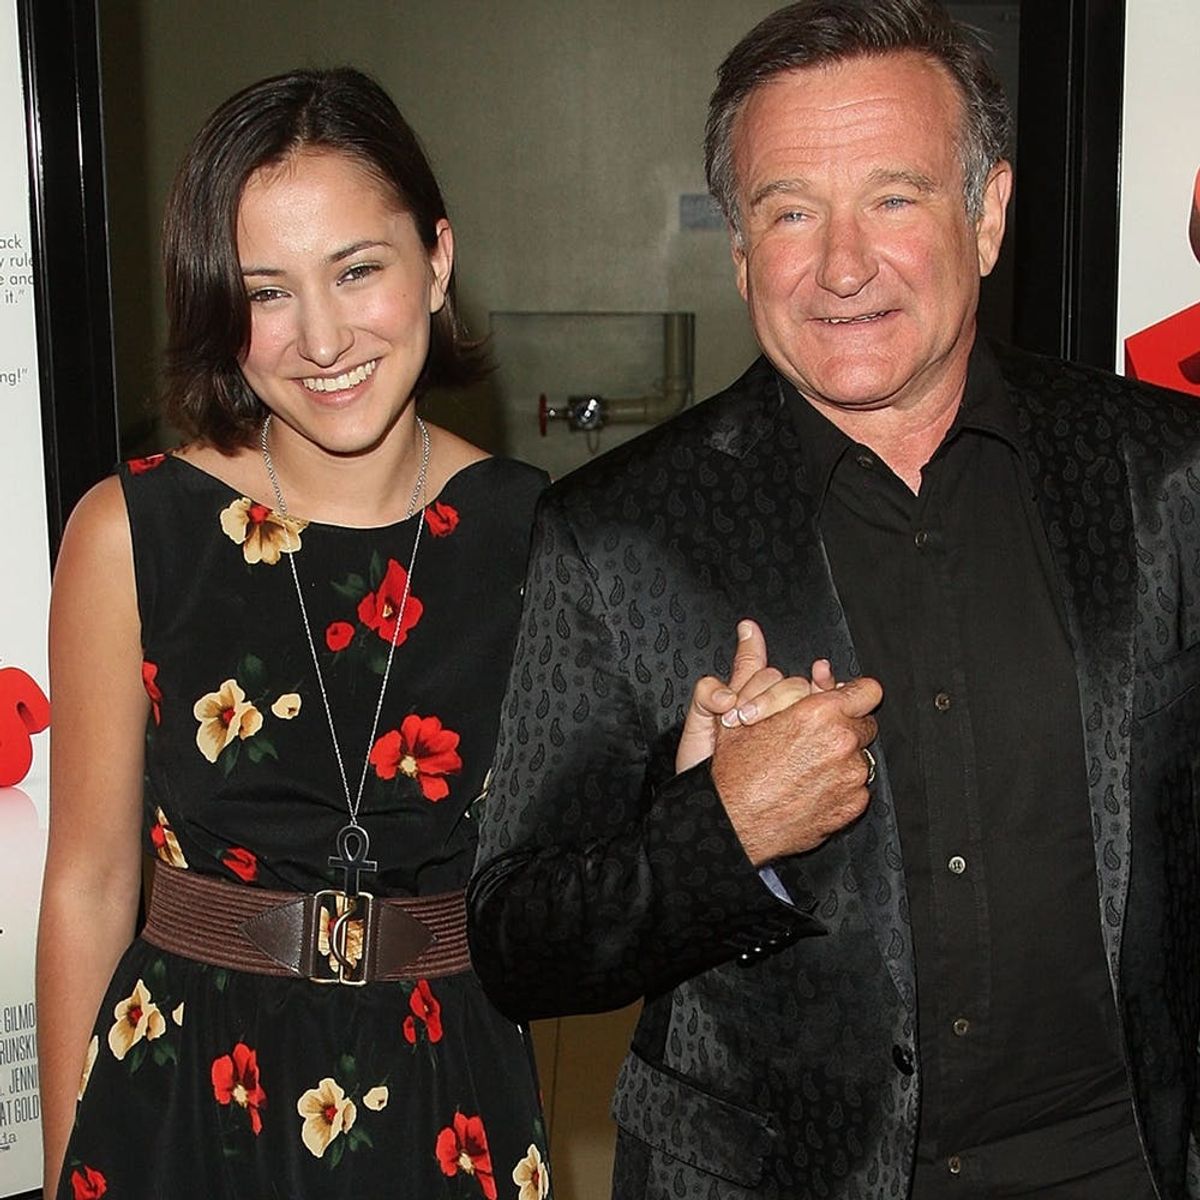 Zelda Williams Just Posted the Sweetest Tribute to Her Dad on His Birthday